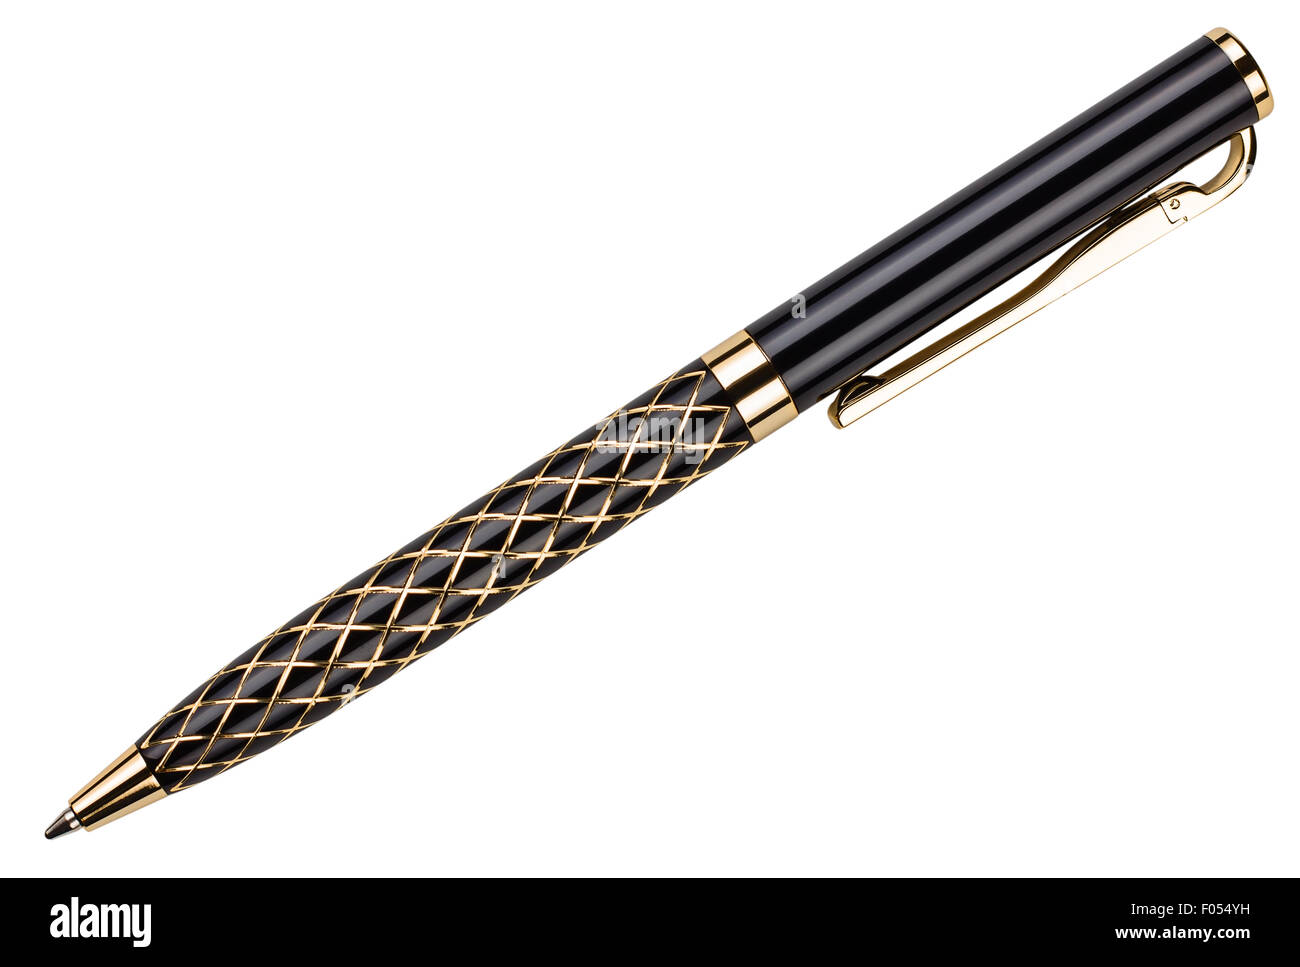 the black and gold pen isolated on white background Stock Photo